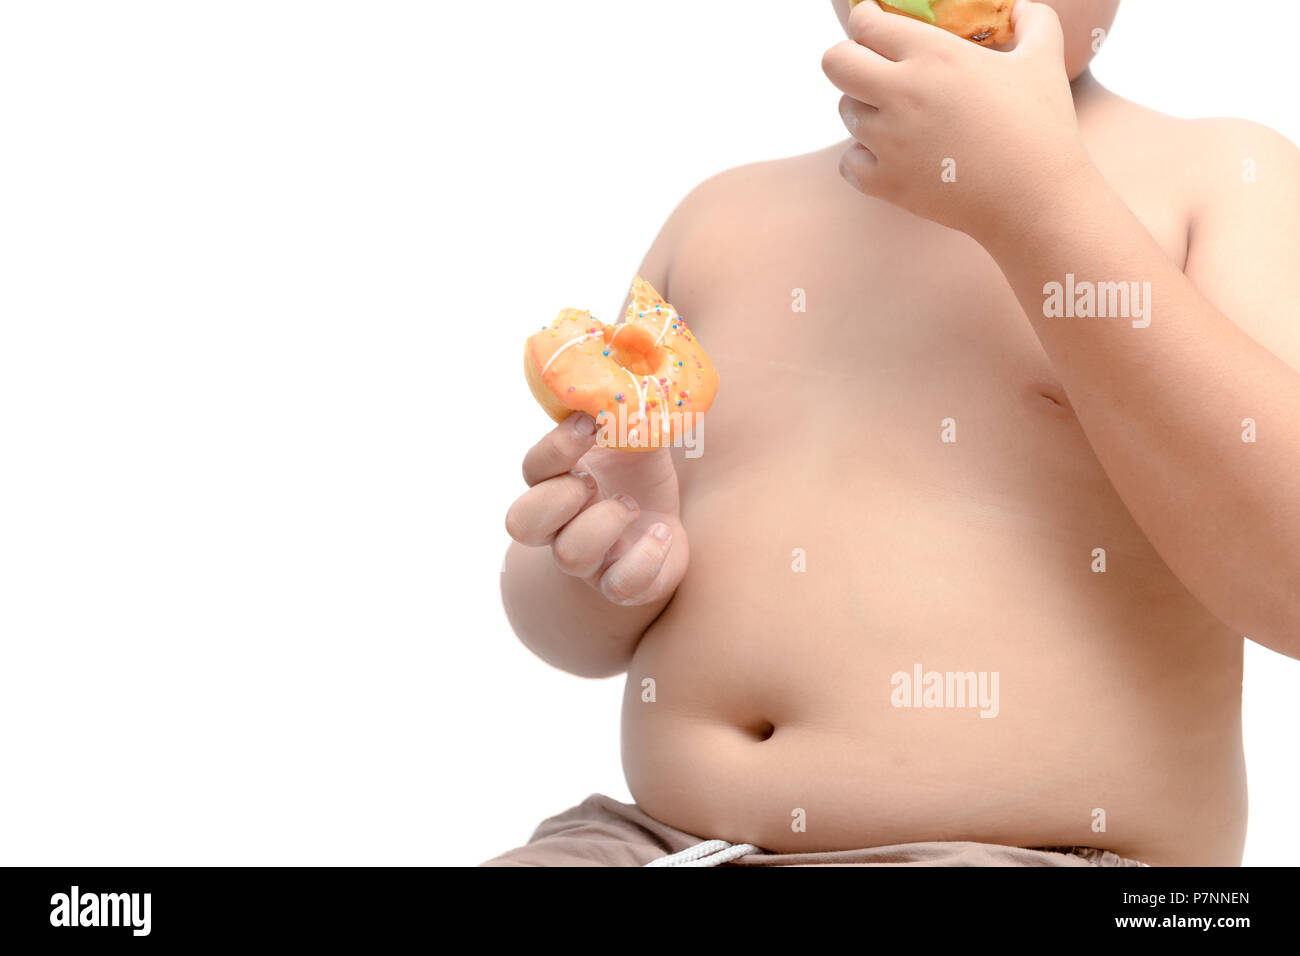 Obese fat boy is holding and eating donut isolated on white background, junk food and dieting concept Stock Photo